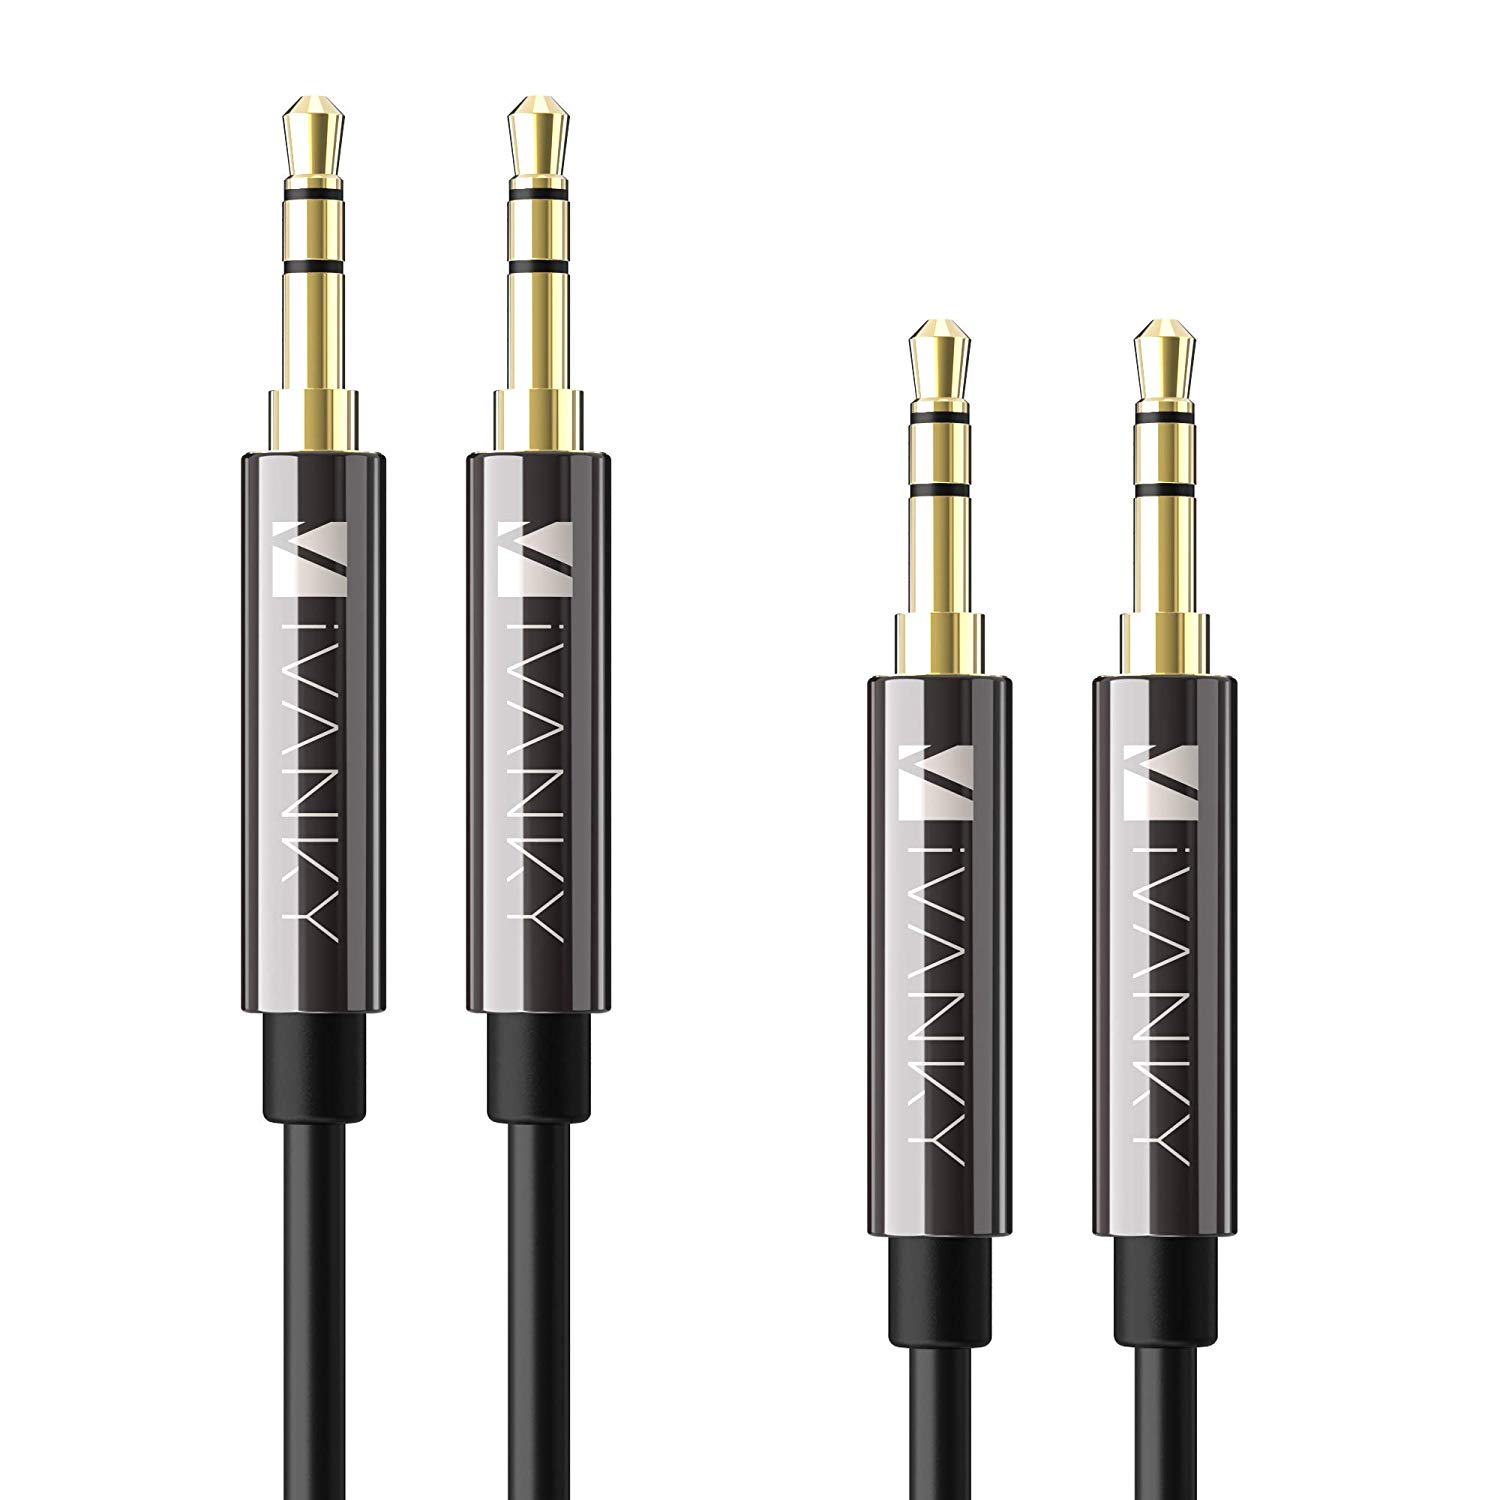 iVanky 3.5mm Auxiliary Audio Cable, 4-Foot